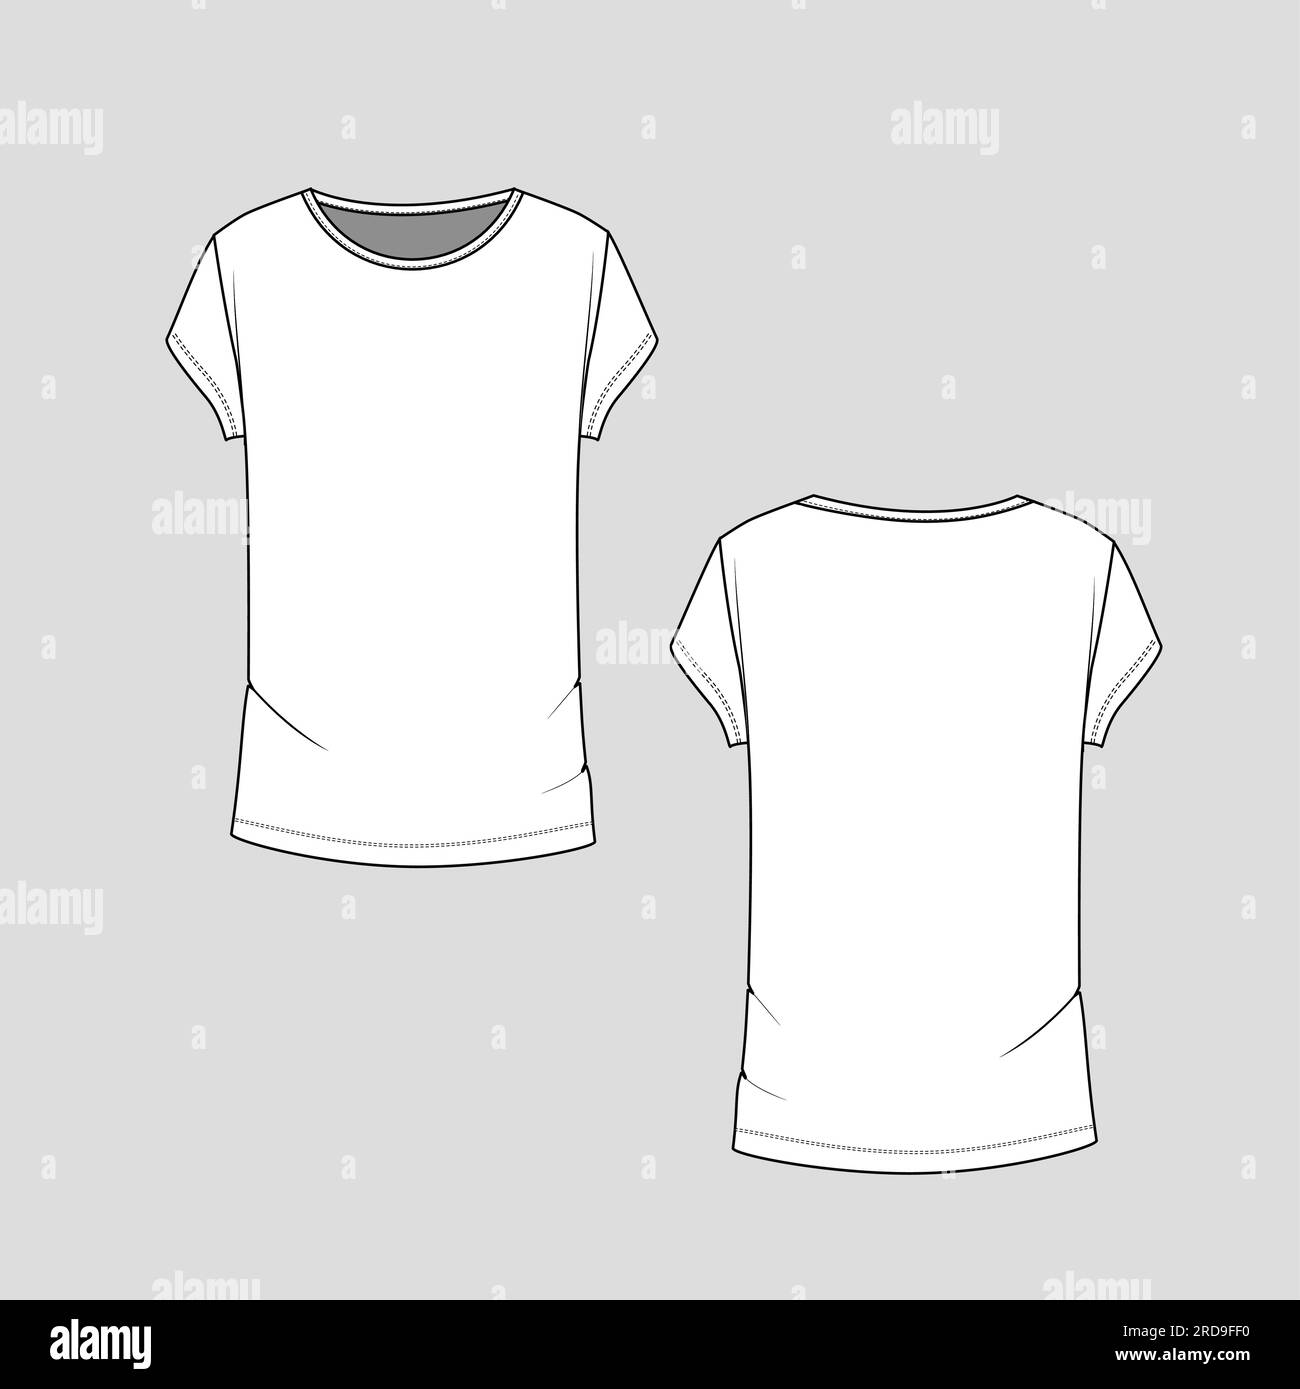 Women t shirt top round neck short sleeve fashion cad mock up flat sketch drawing template design vector Stock Vector